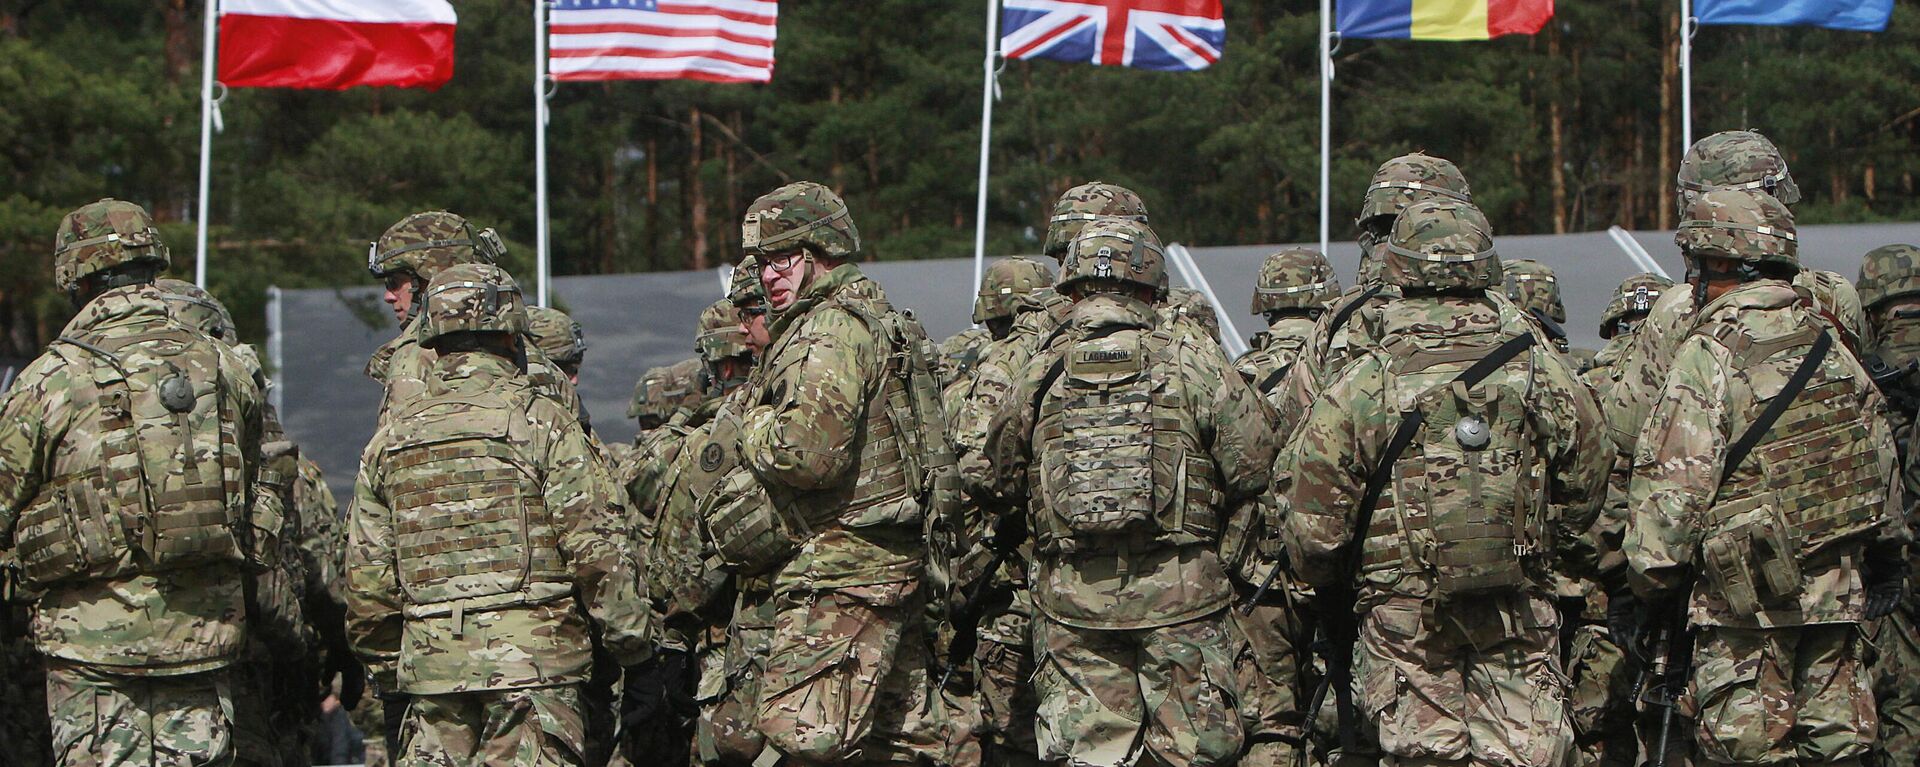 US troops, part of a NATO mission to enhance Poland's defence, are getting ready for an official welcoming ceremony in Orzysz, northeastern Poland, Thursday, April 13, 2017 - Sputnik International, 1920, 29.03.2024